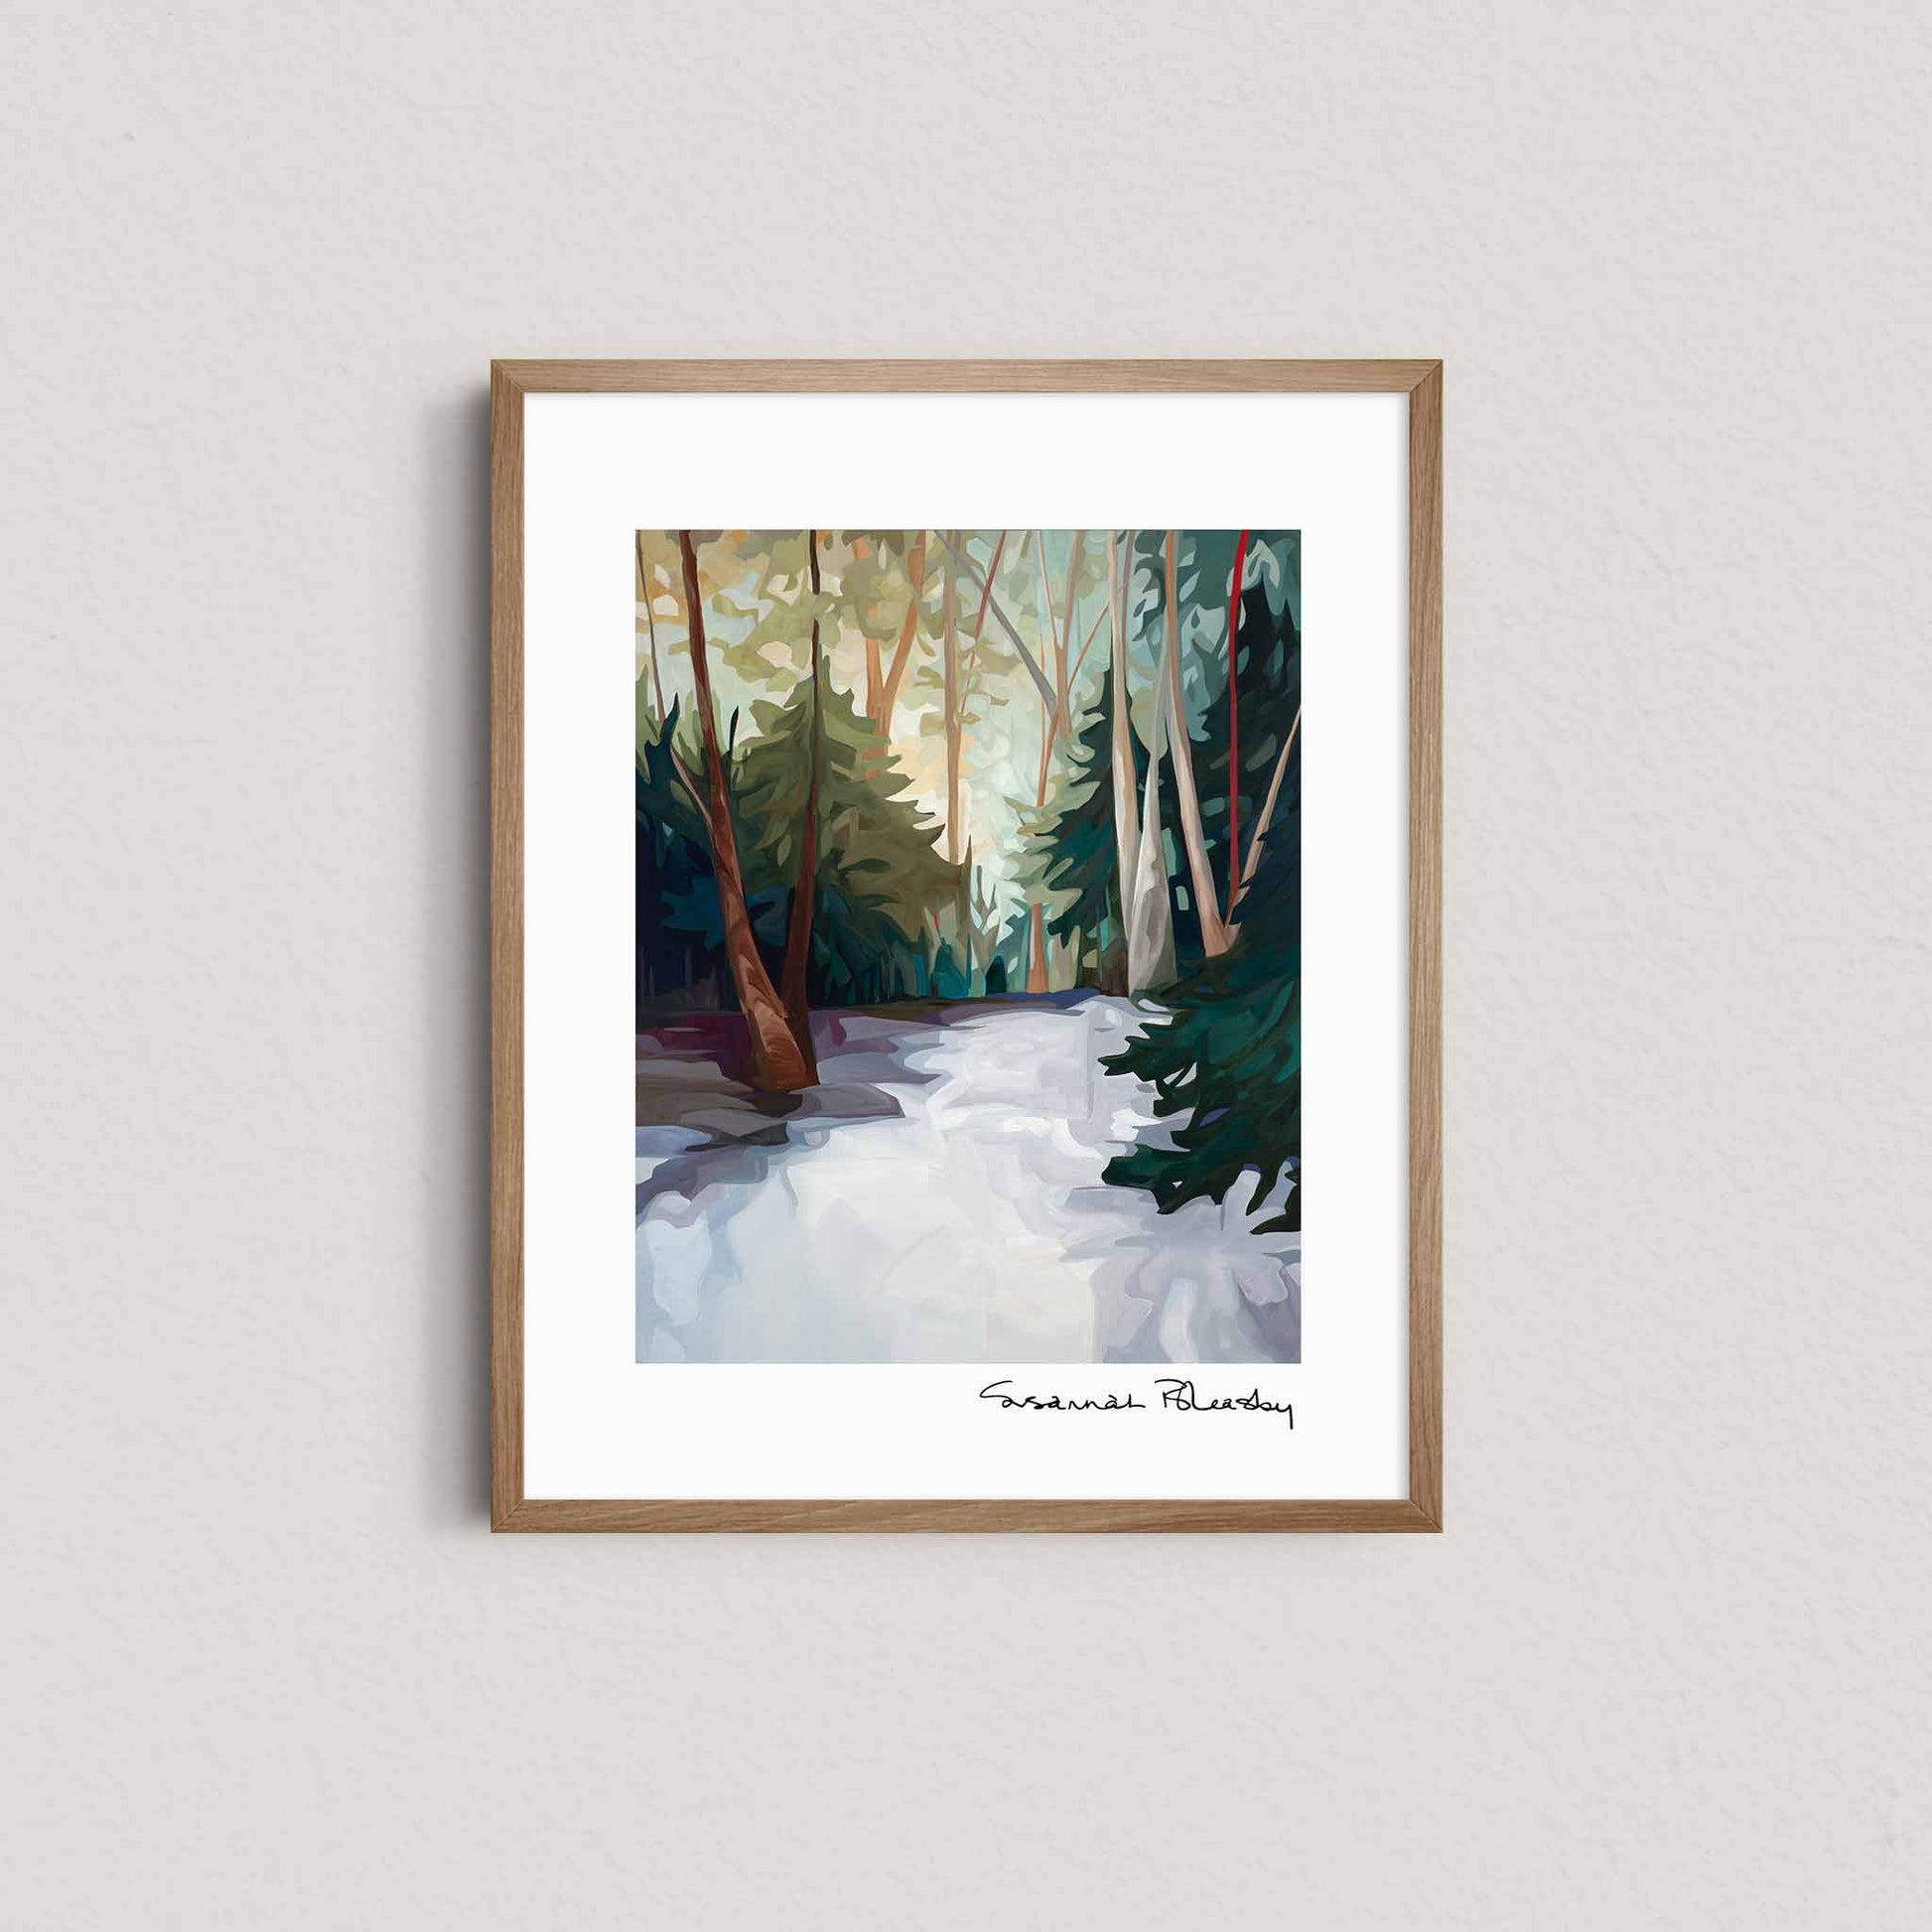 8x10 art print of abstract forest landscape painting print by Canadian artist Susannah Bleasby